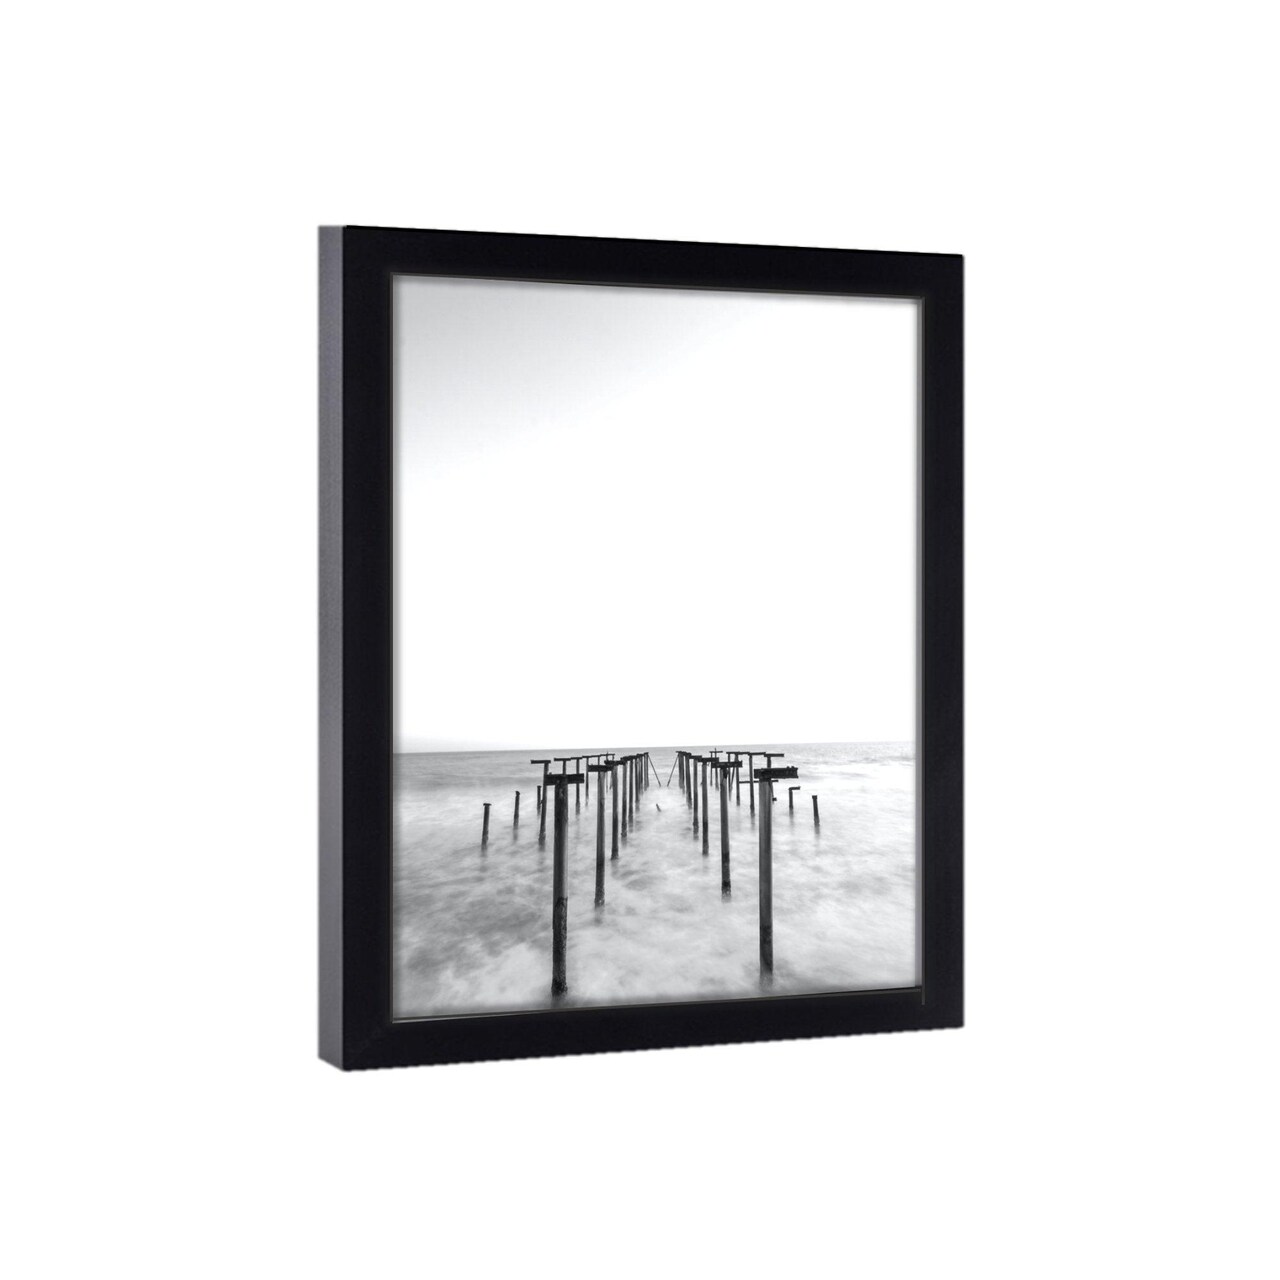 Gallery Wall 30x40 Picture Frame Black 30x40 Frame 30 x 40 Poster